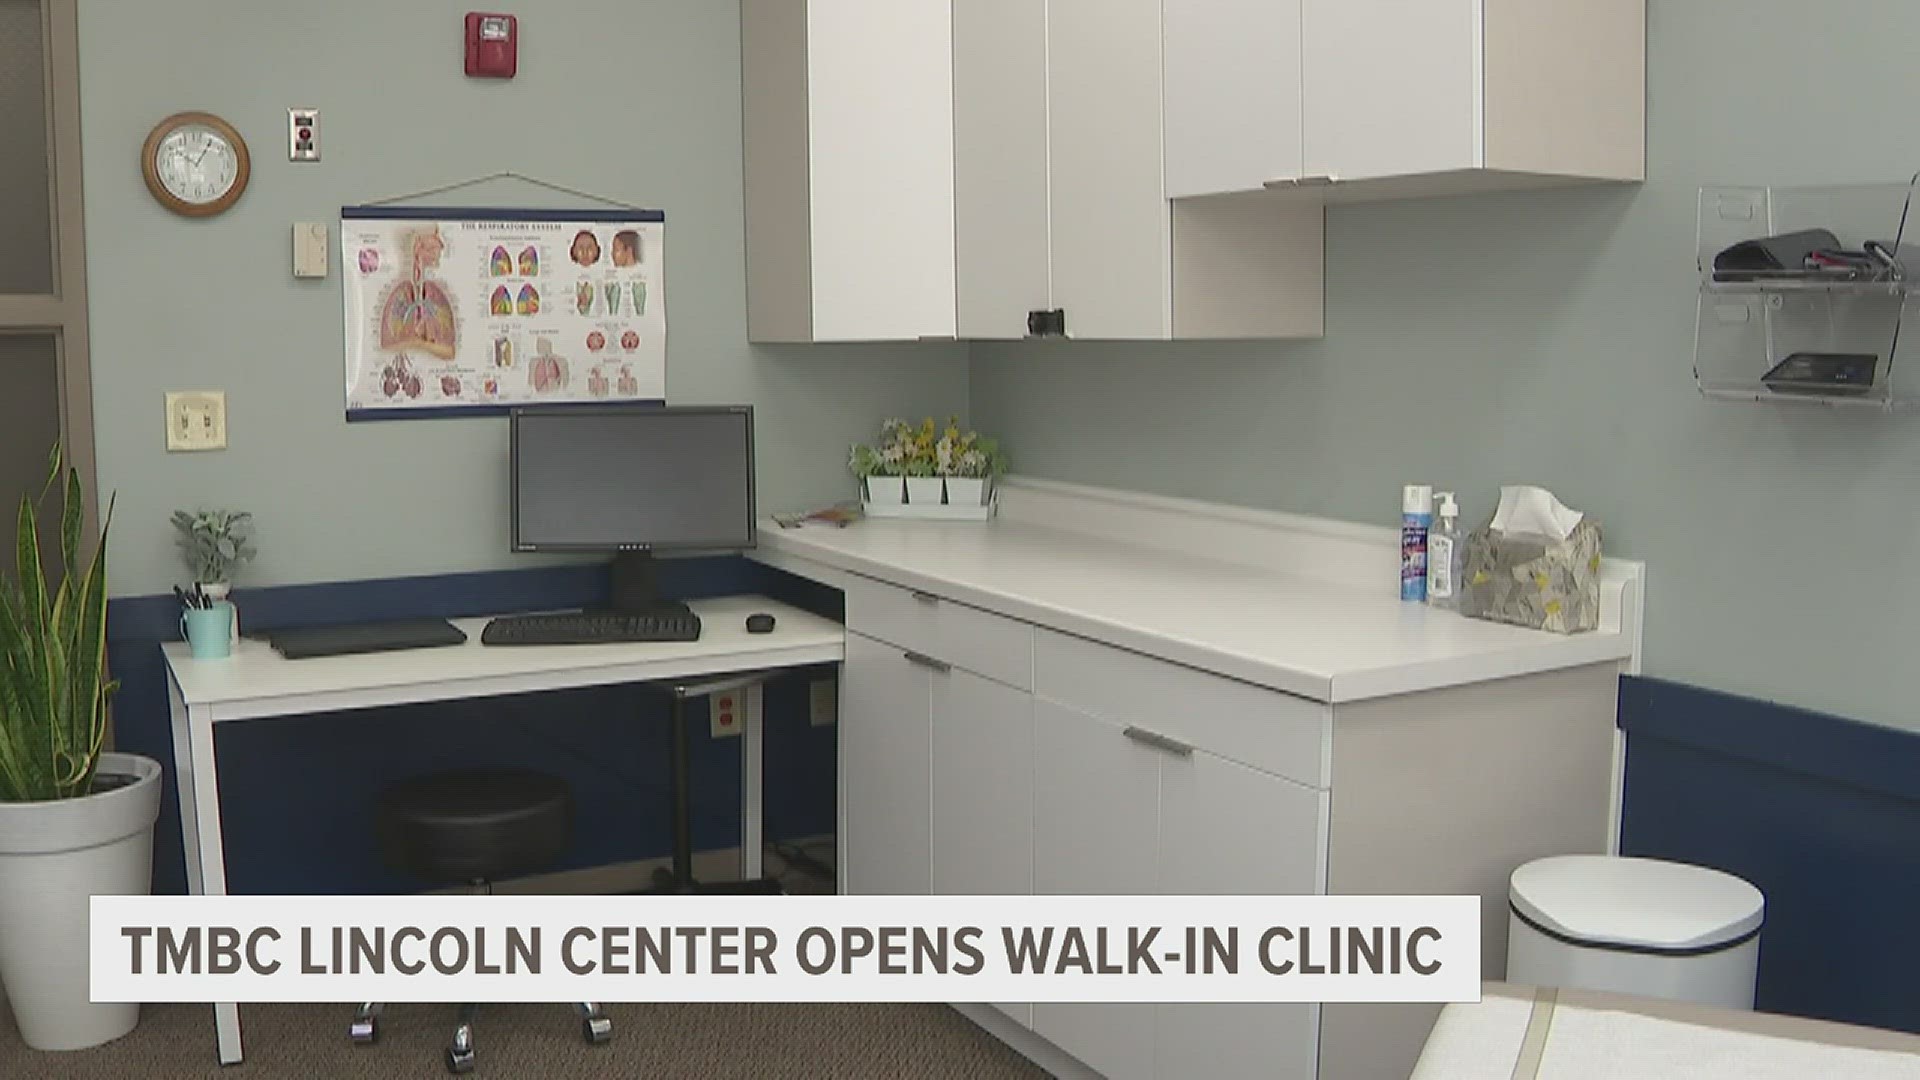 The clinic will offer walk-in appointments on Wednesdays and free blood pressure checks.